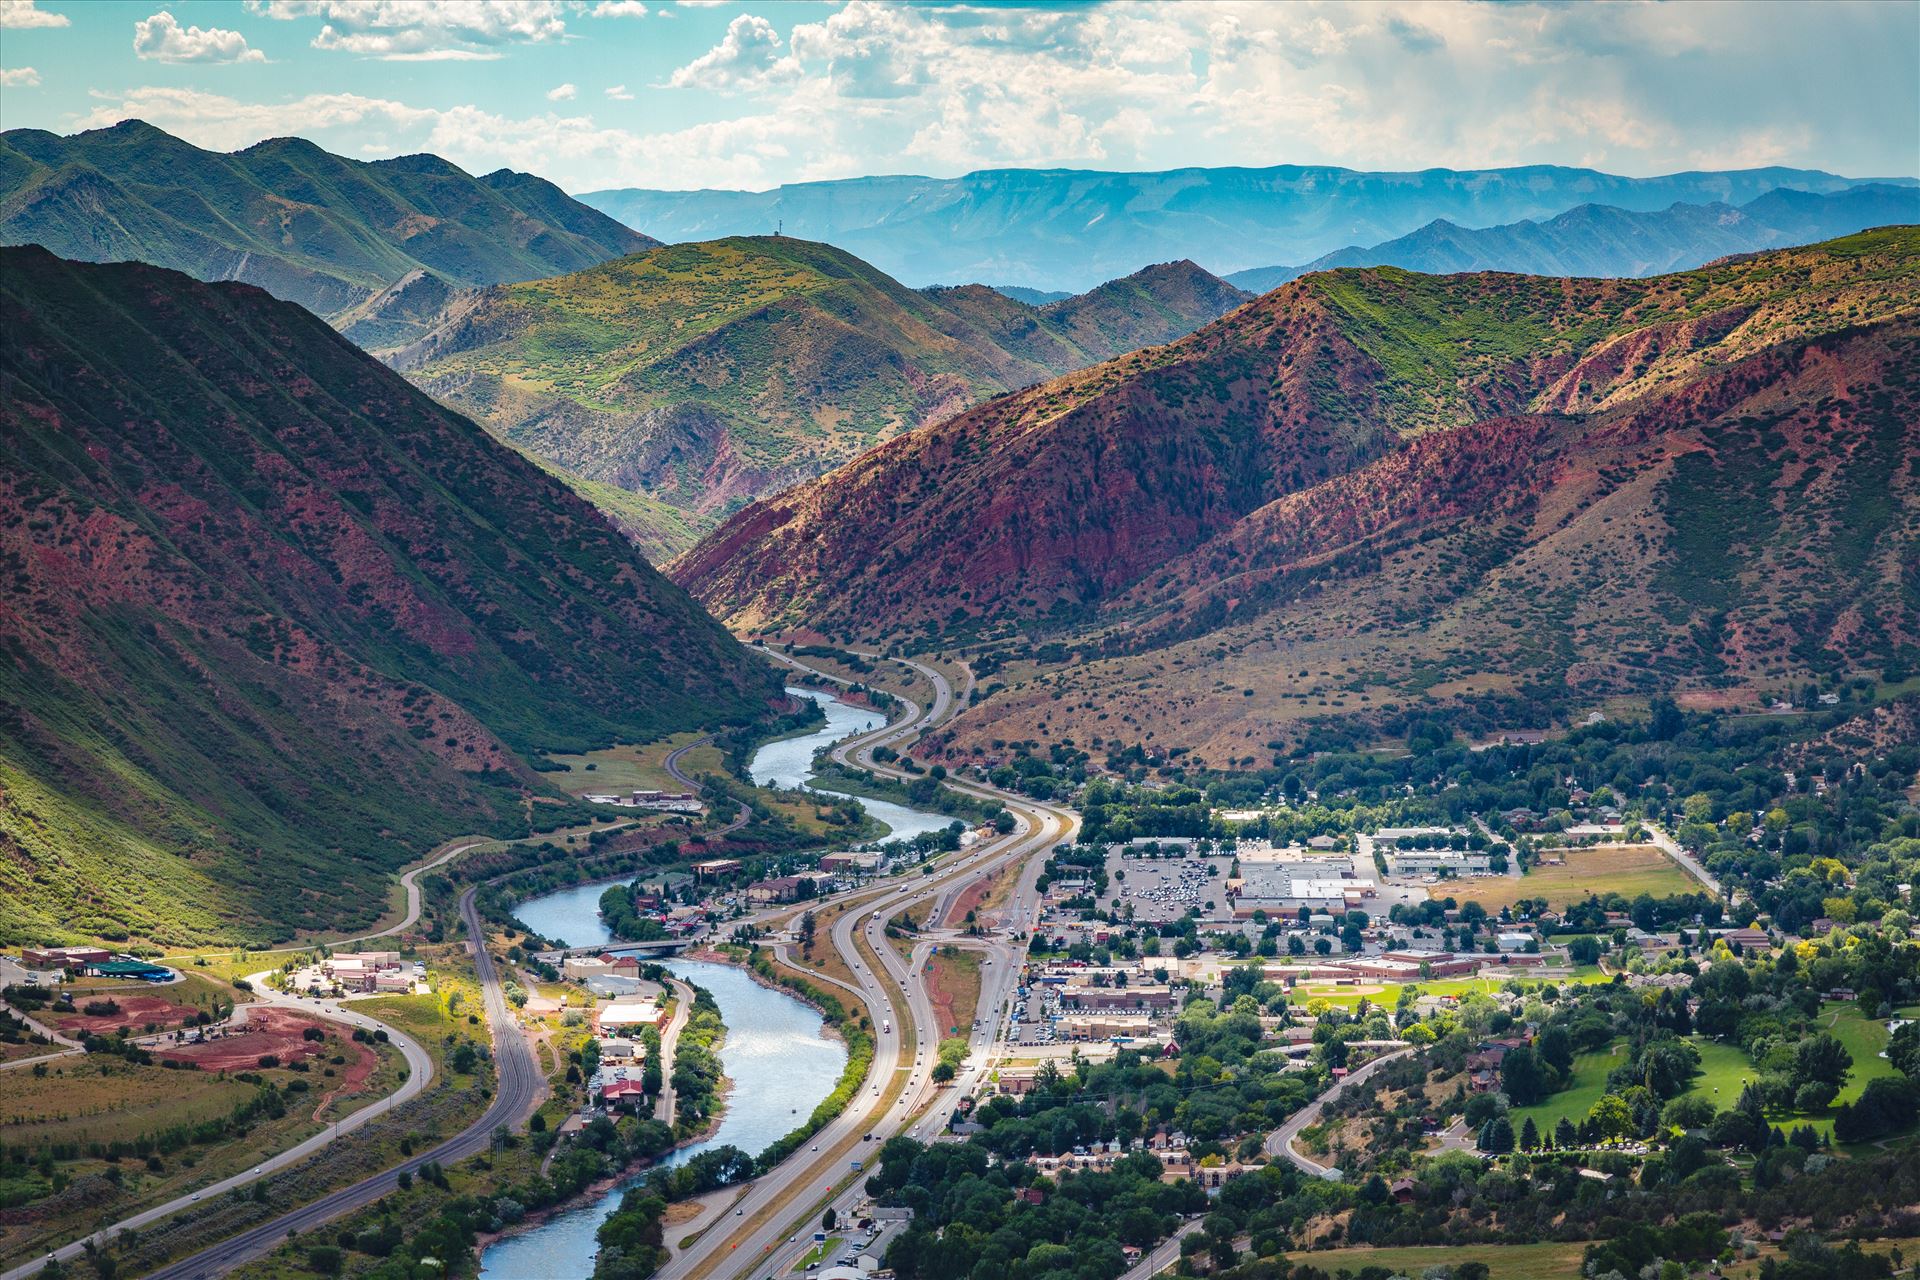 Glenwood Springs from Glenwood Caverns No 2 Landscape version of the view from the top of Glenwood Caverns, the city of Glenwood Springs, Colorado looks miniature. by Scott Smith Photos